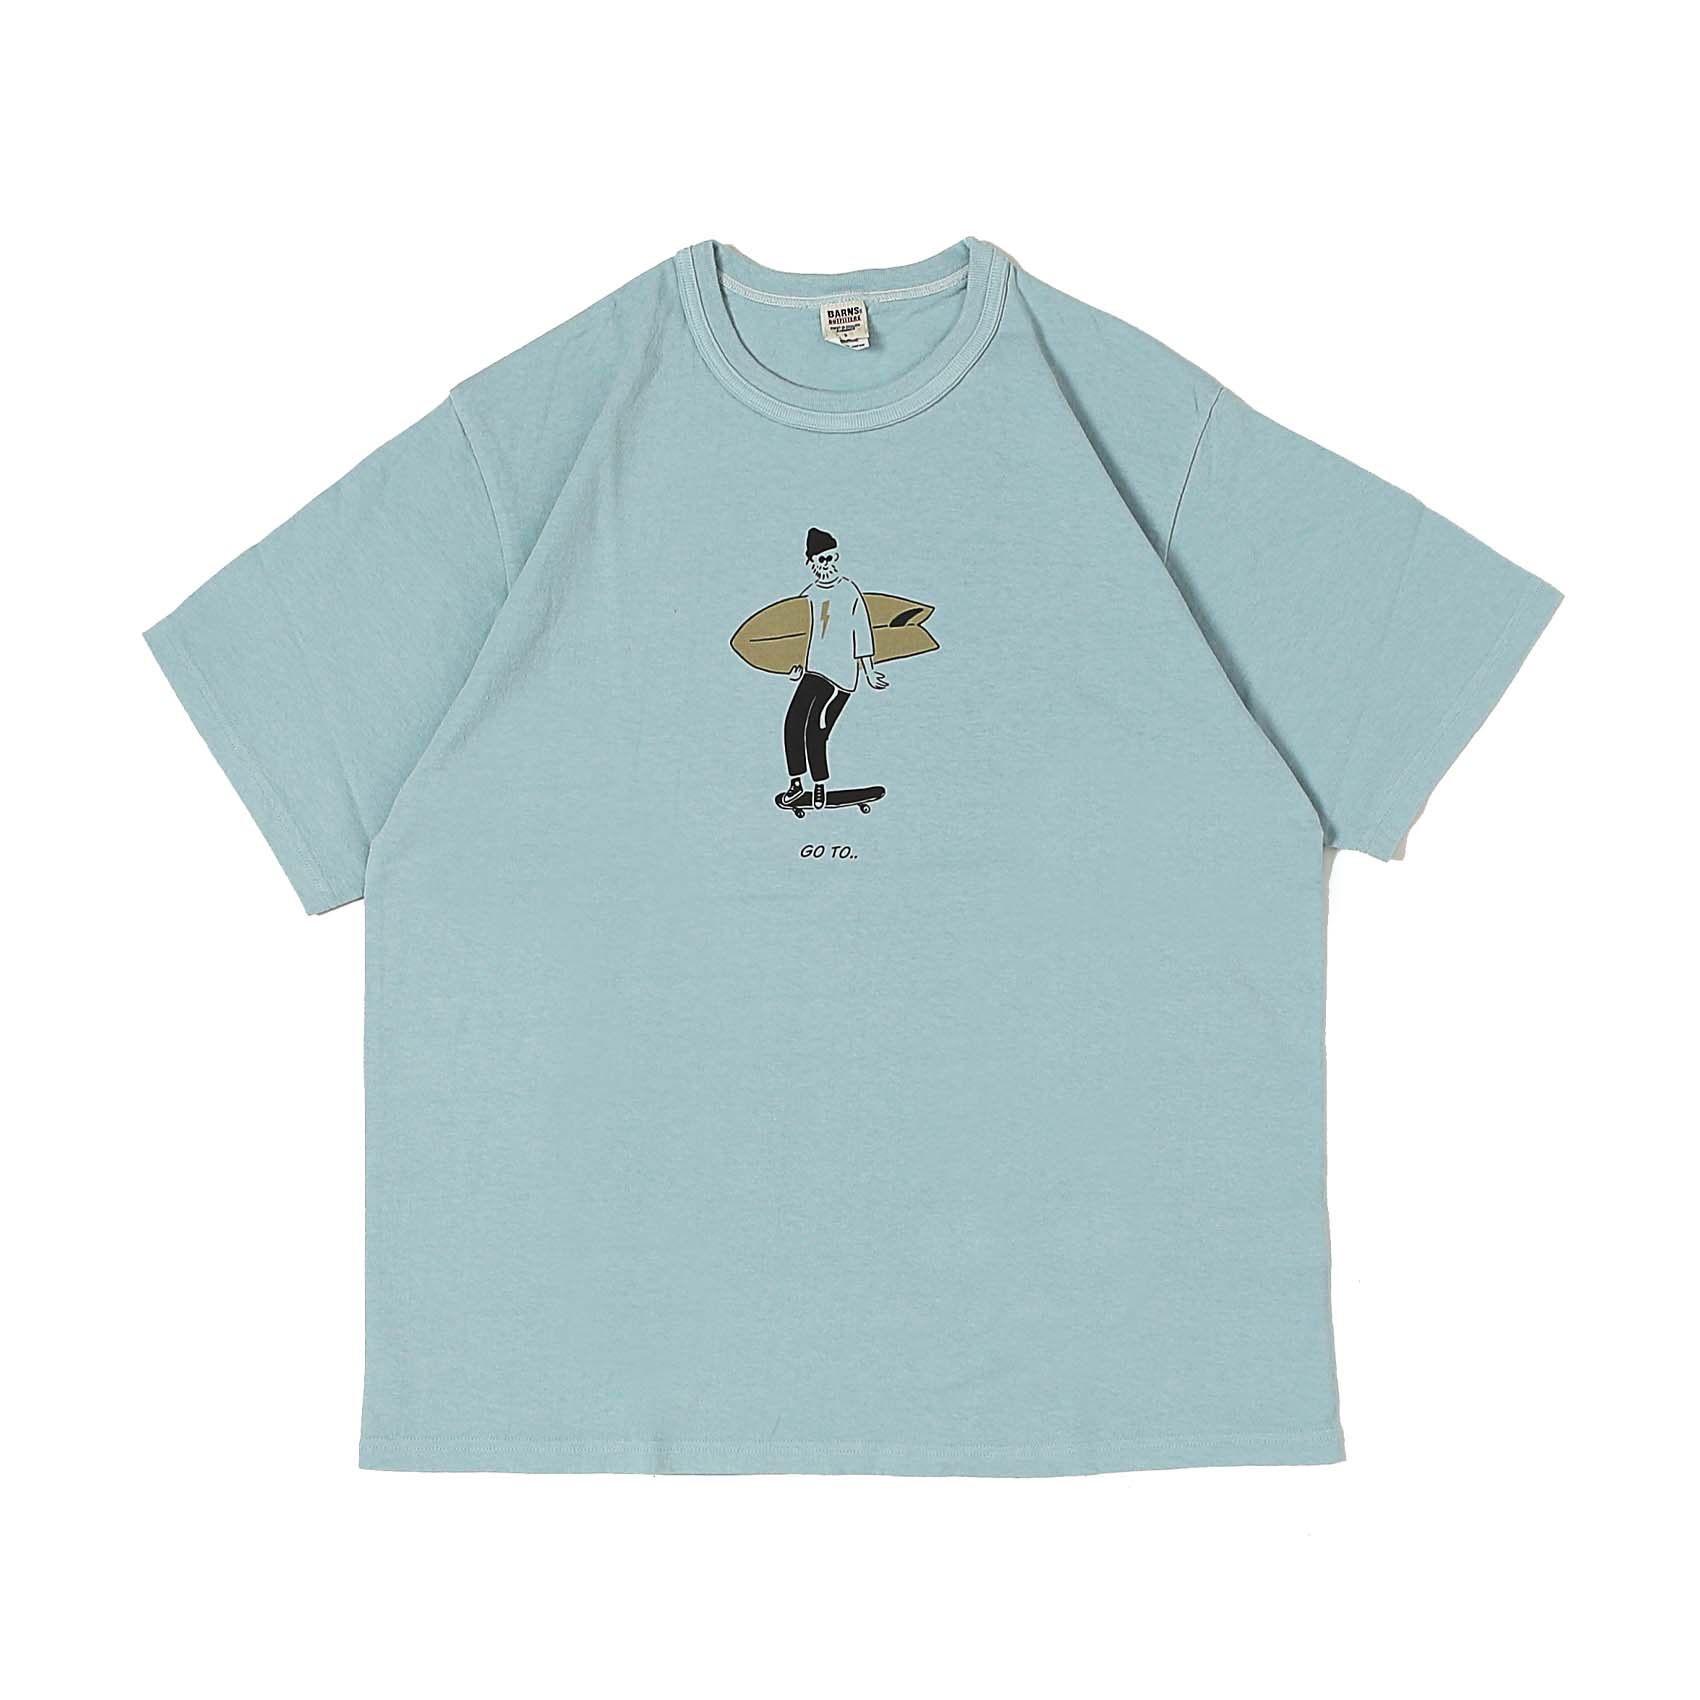 S/S PRINTED TEE - GO TO LIGHT BLUE